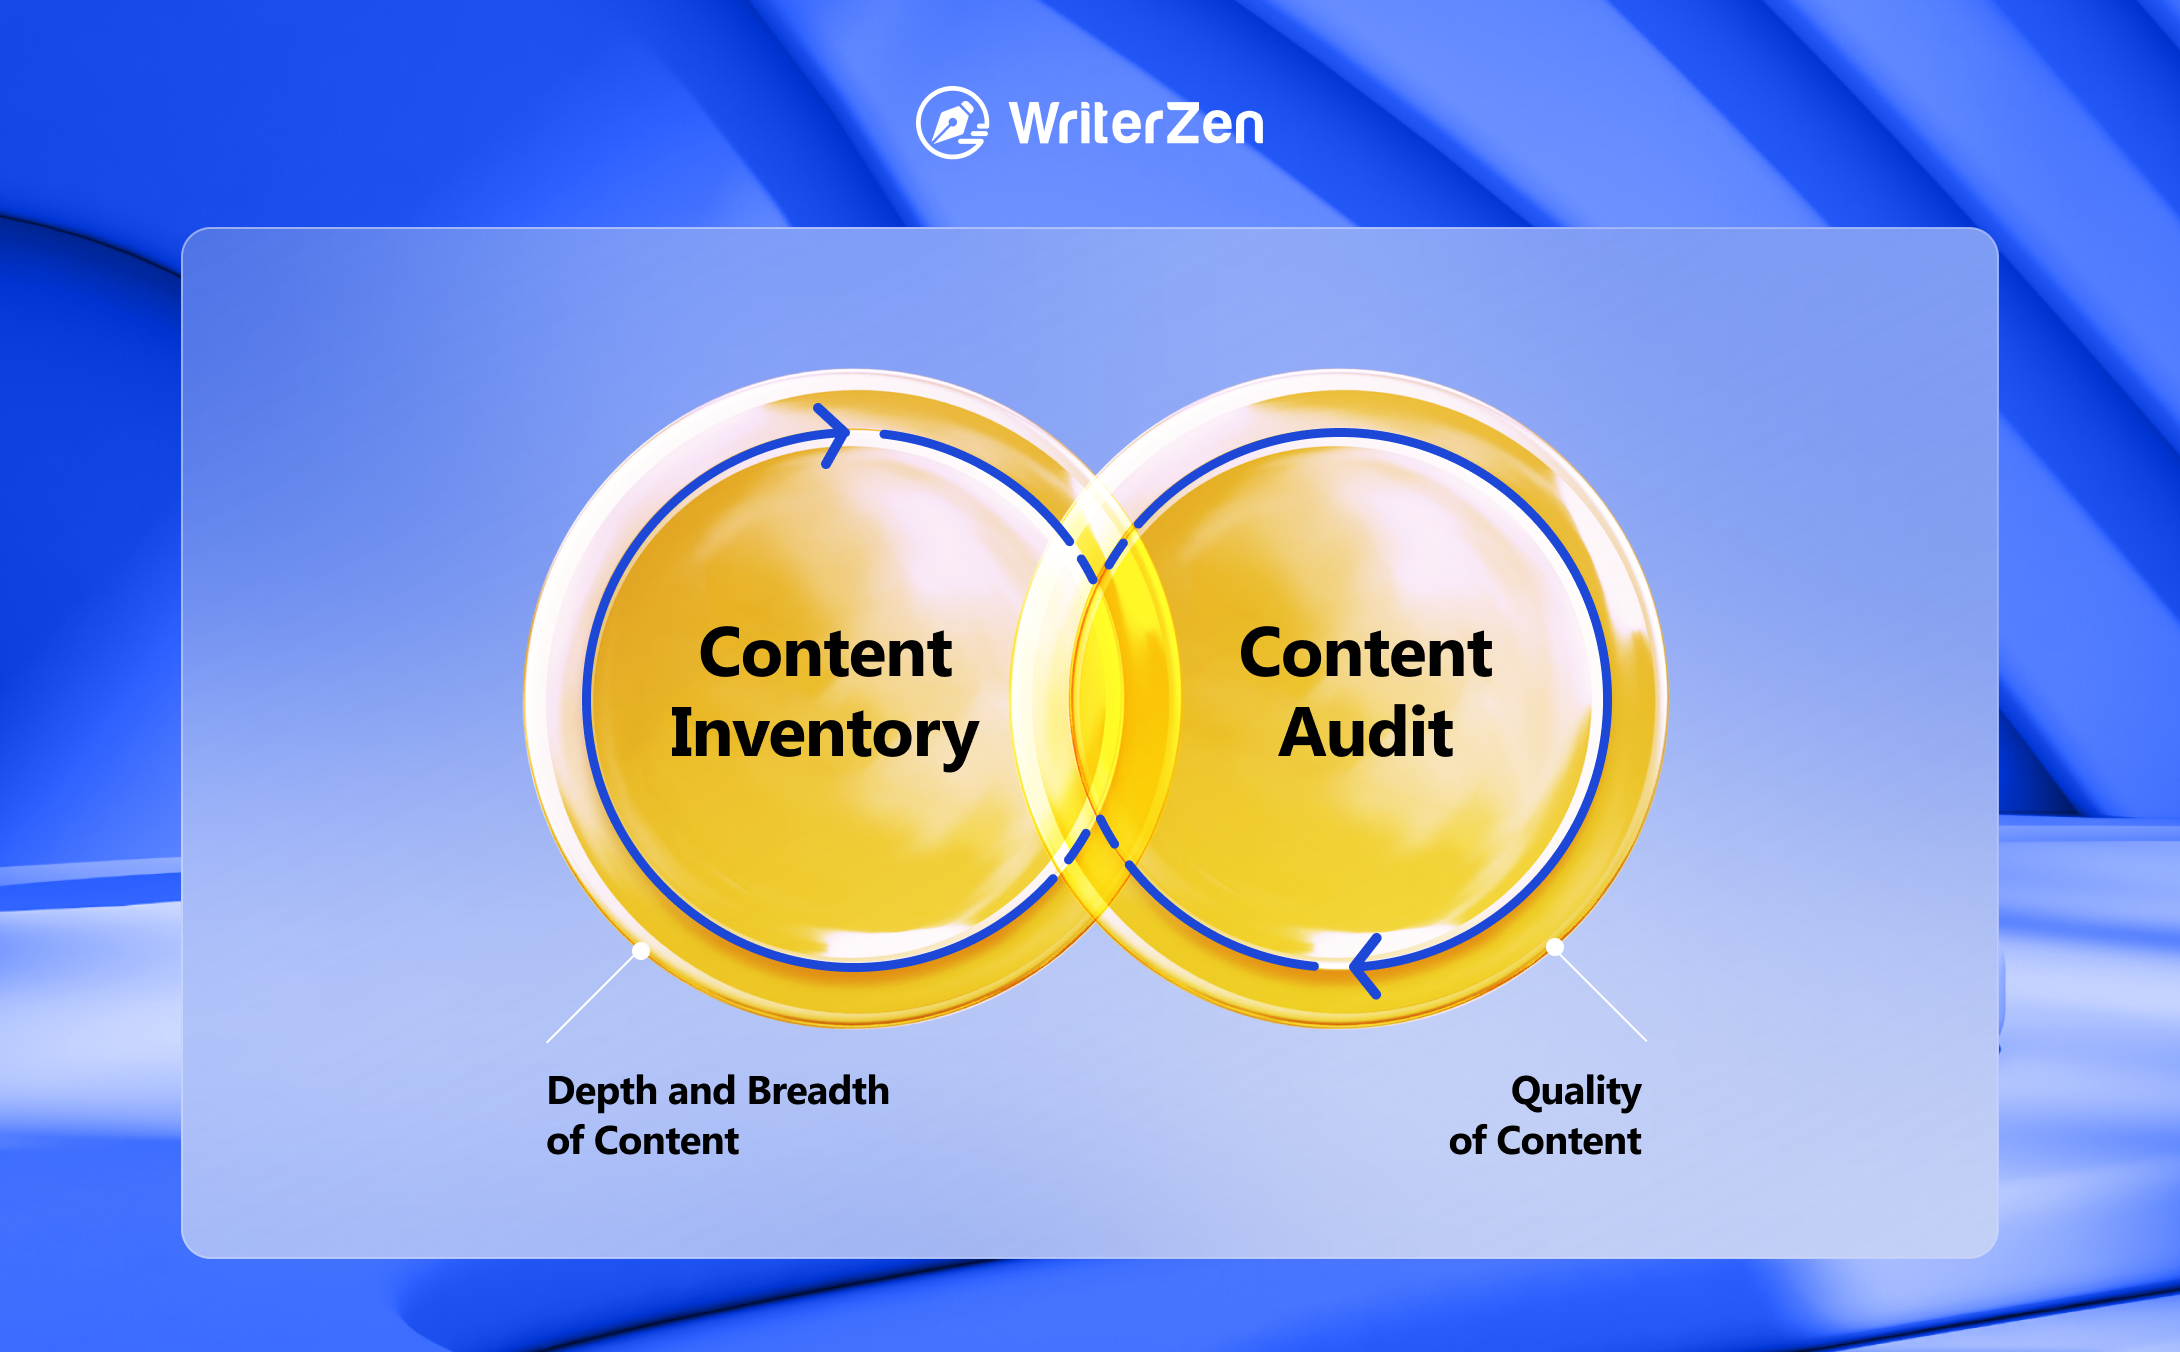 Content Inventory and Content Audit